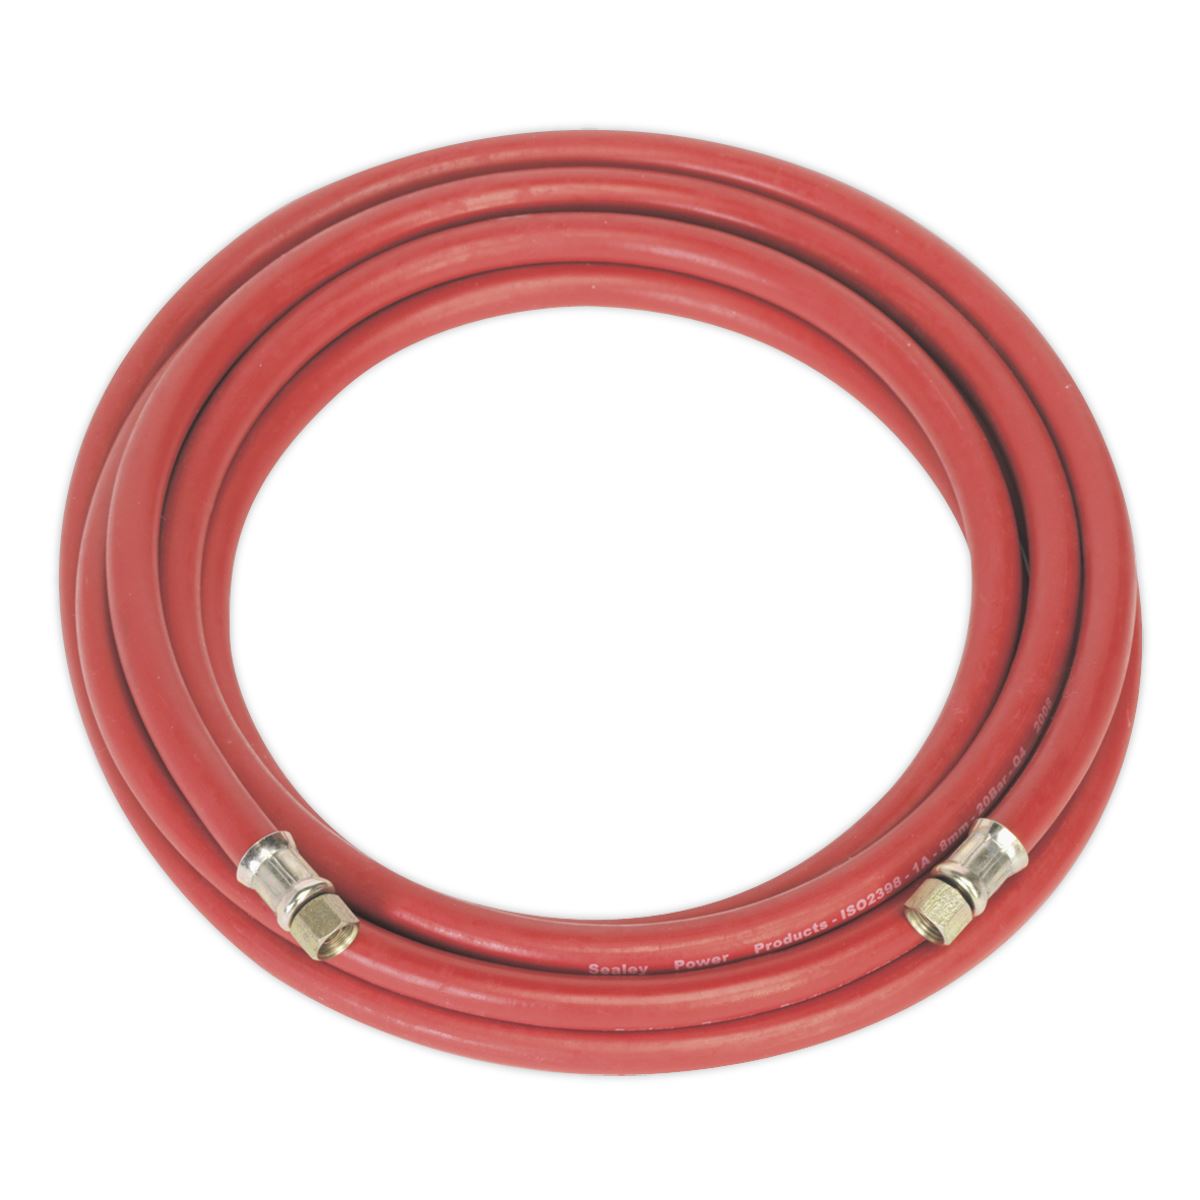 Sealey Air Hose 5m x Ø8mm with 1/4"BSP Unions